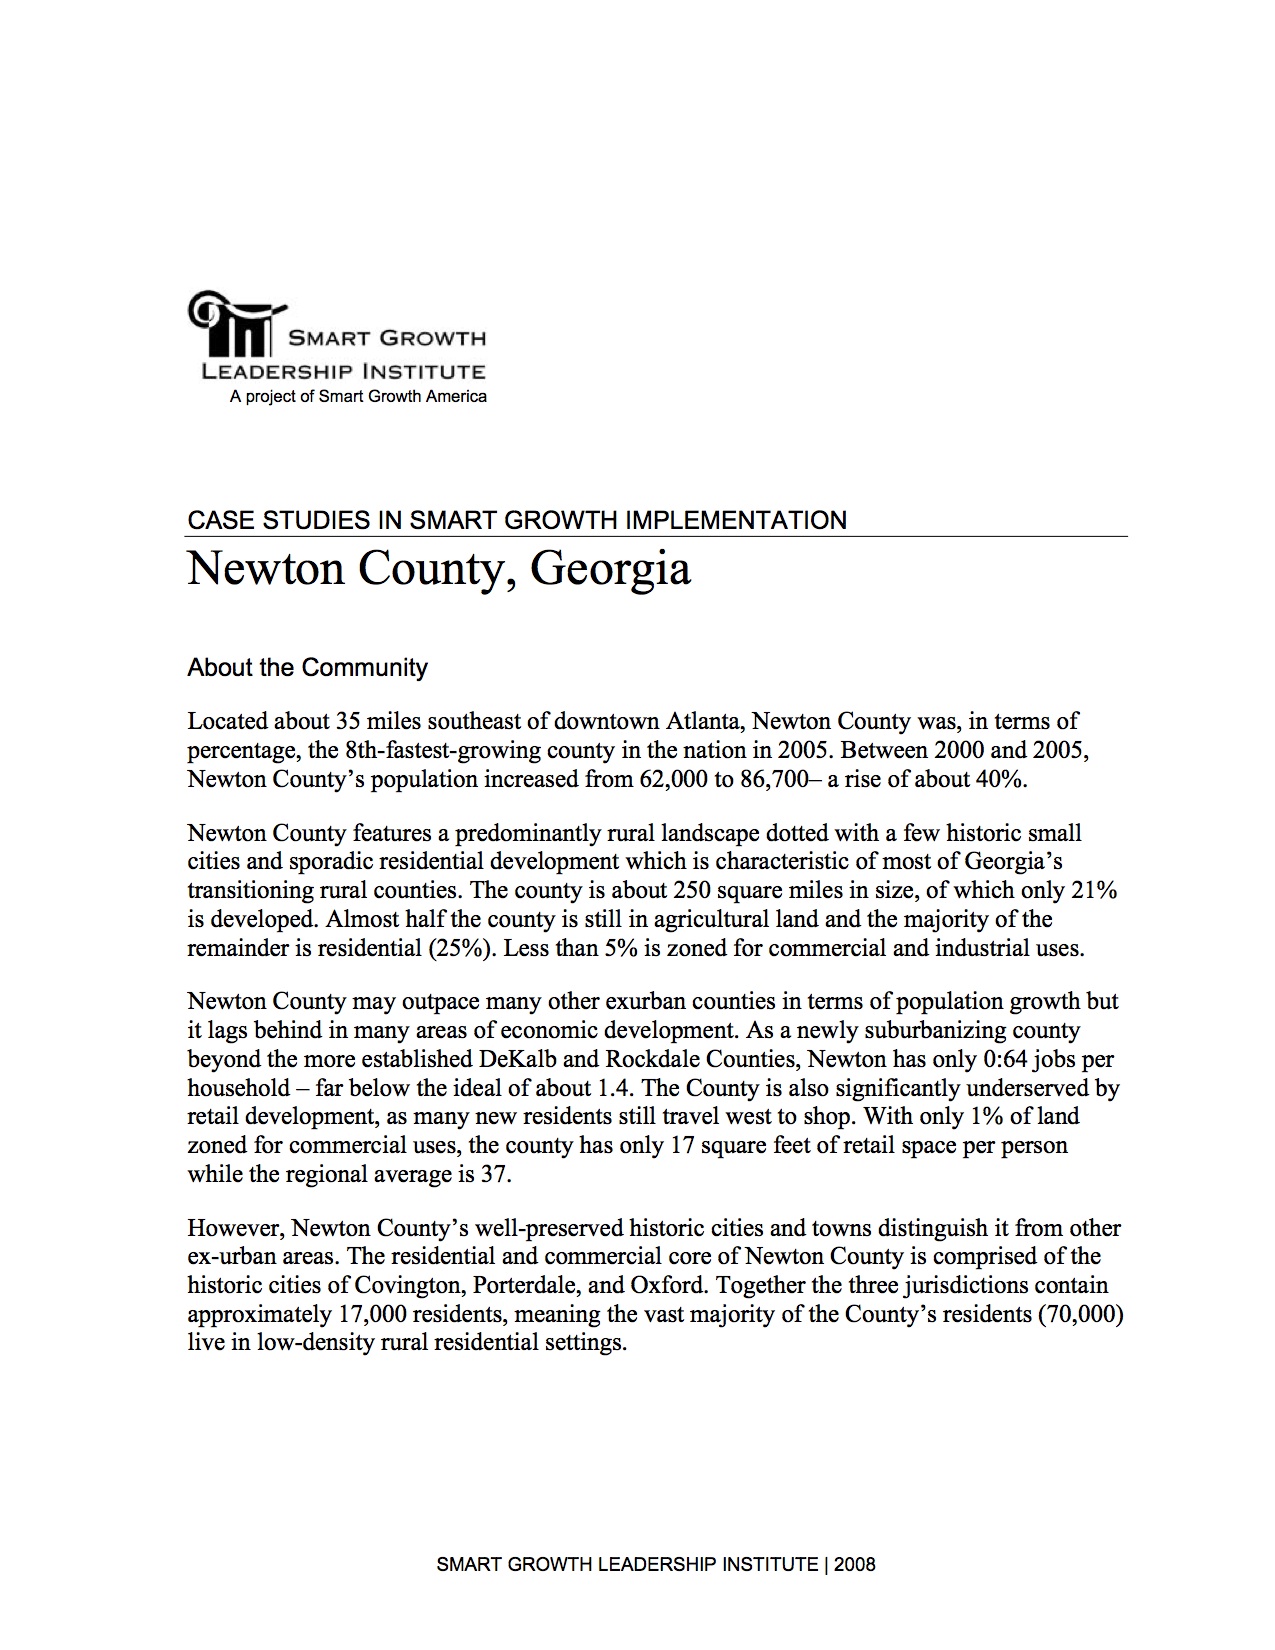 Case Studies in Smart Growth Implementation: Newton County, Georgia